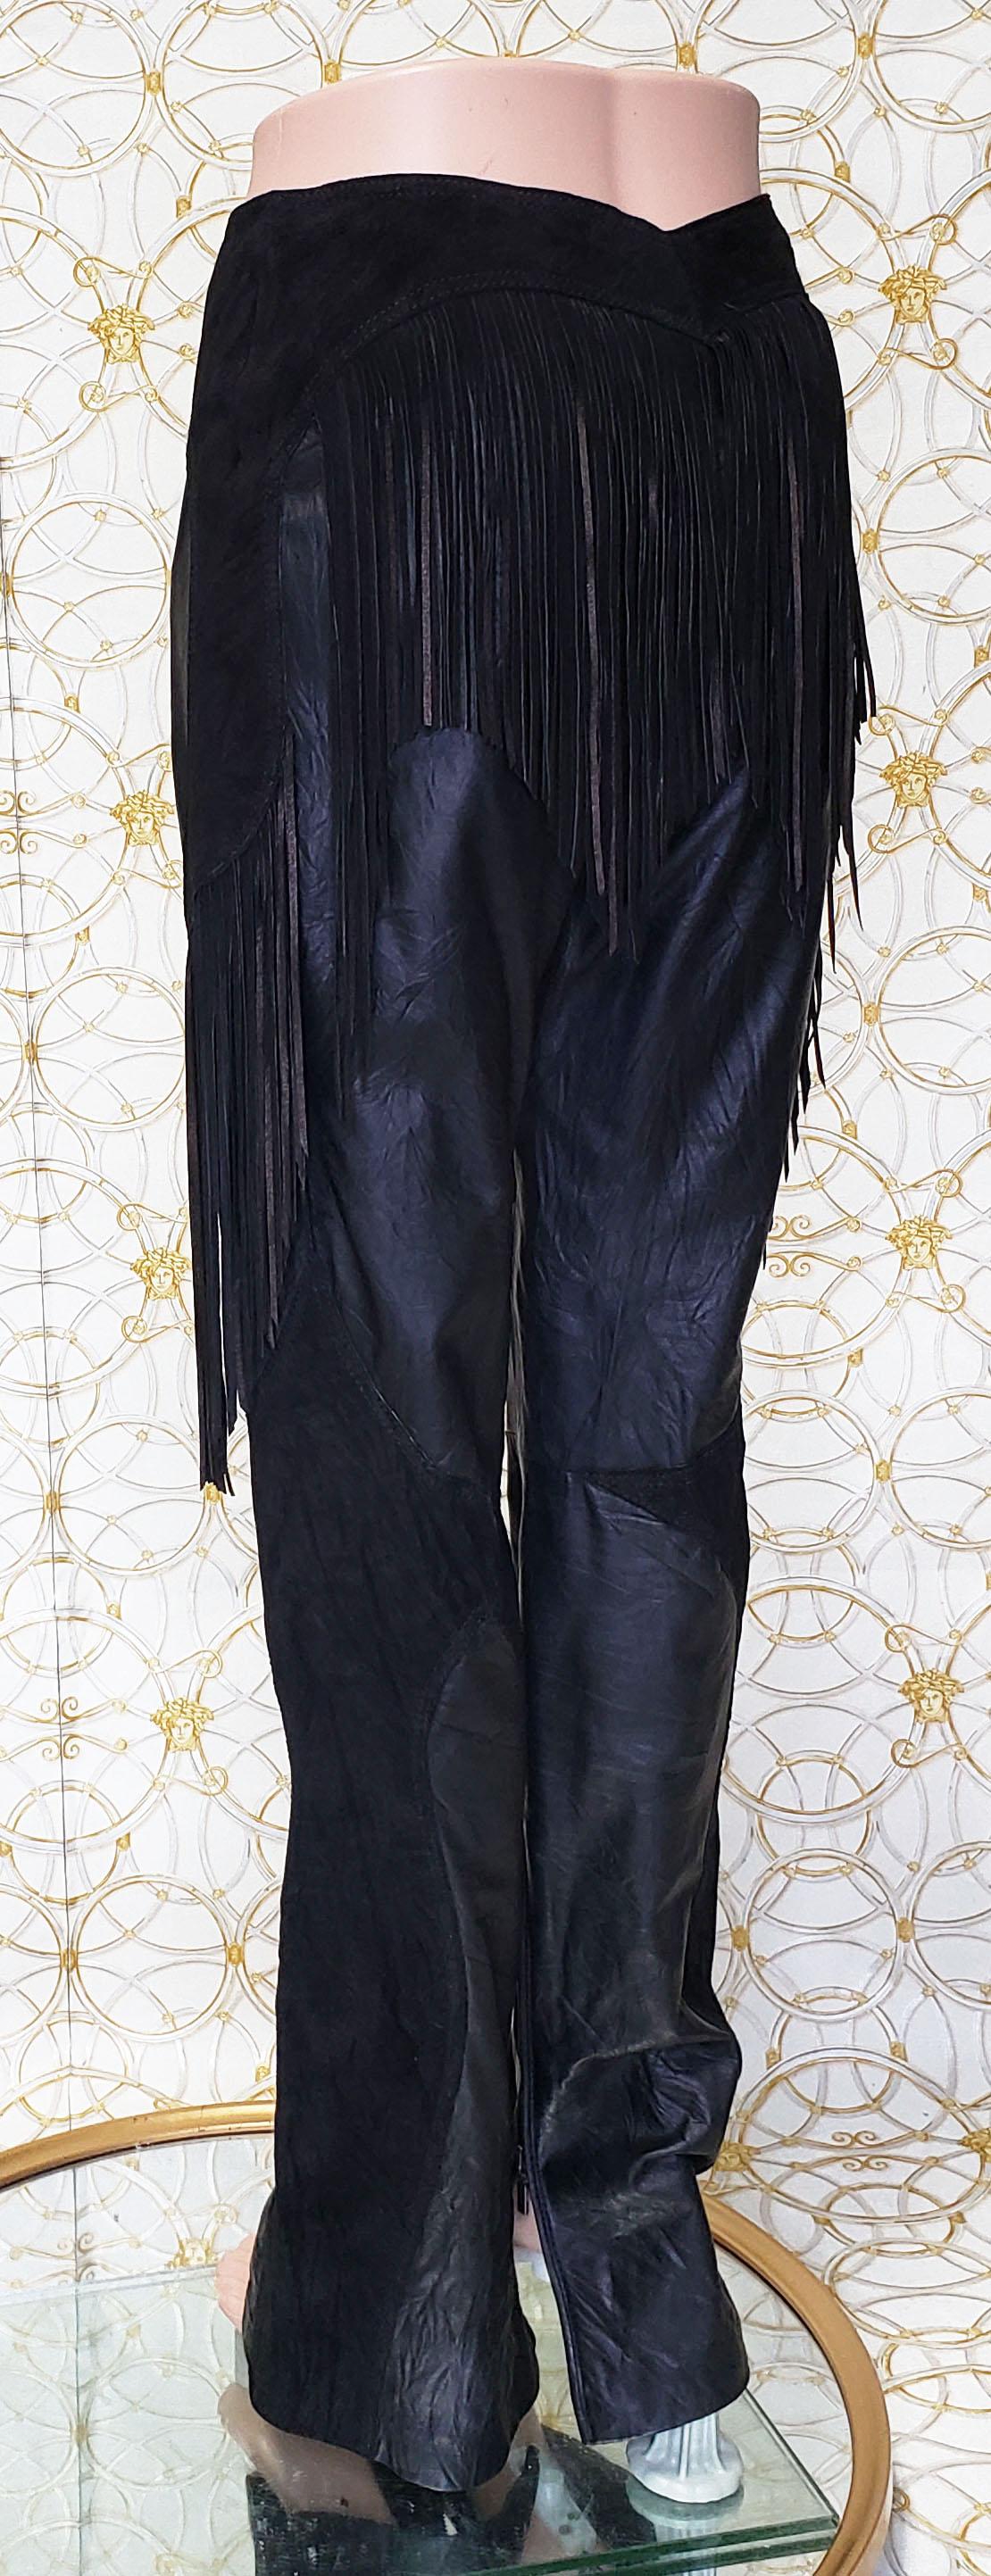 leather pants with fringe